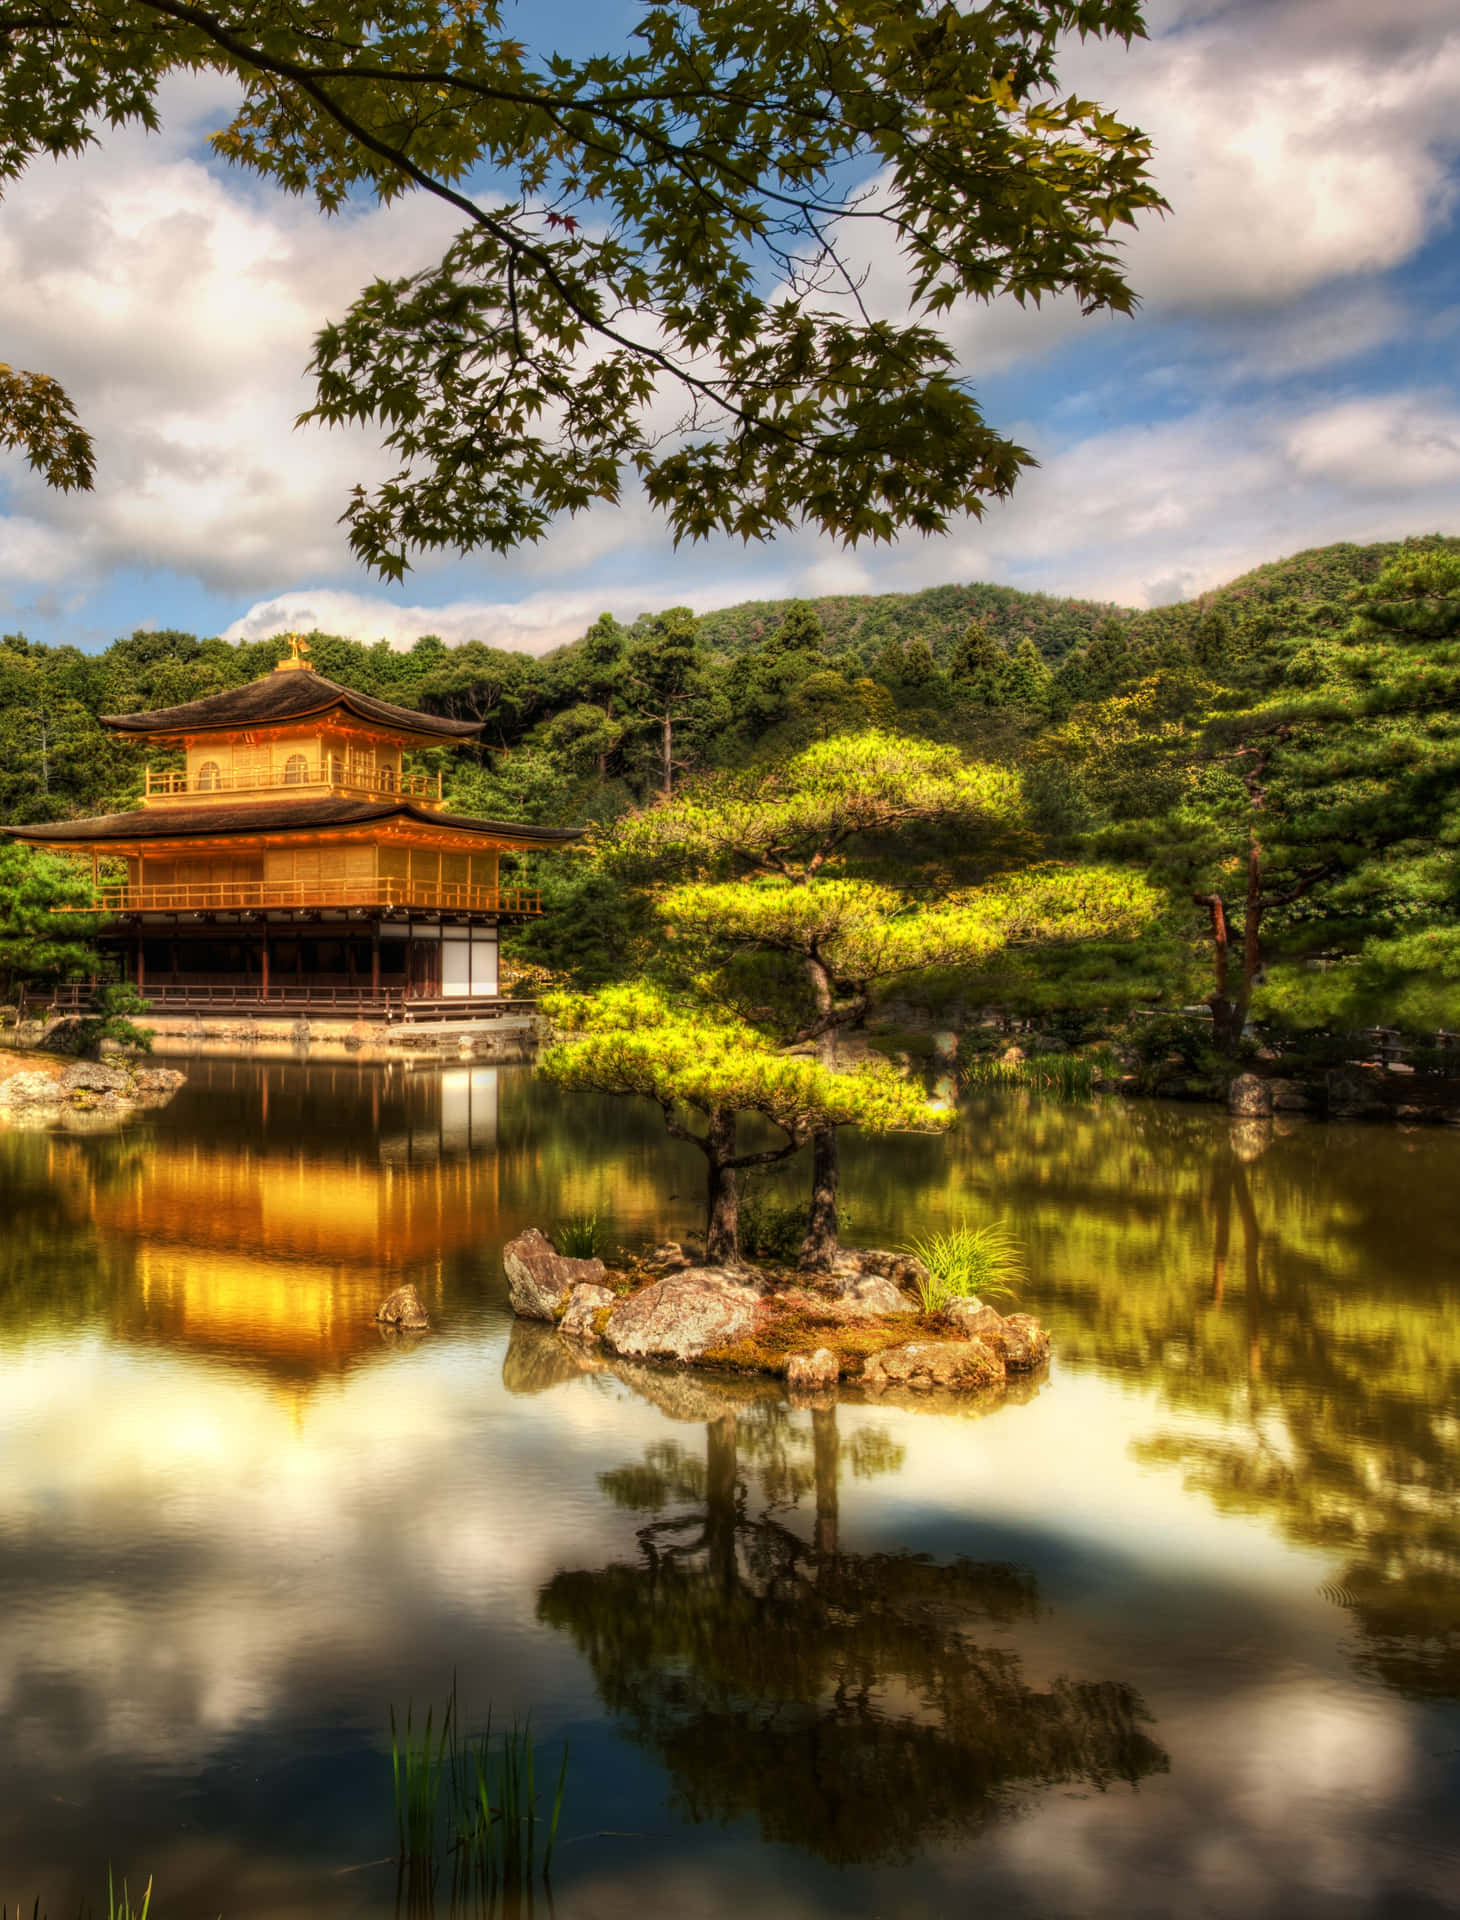 “Ancient Temple Built In A Traditional Japanese Garden”